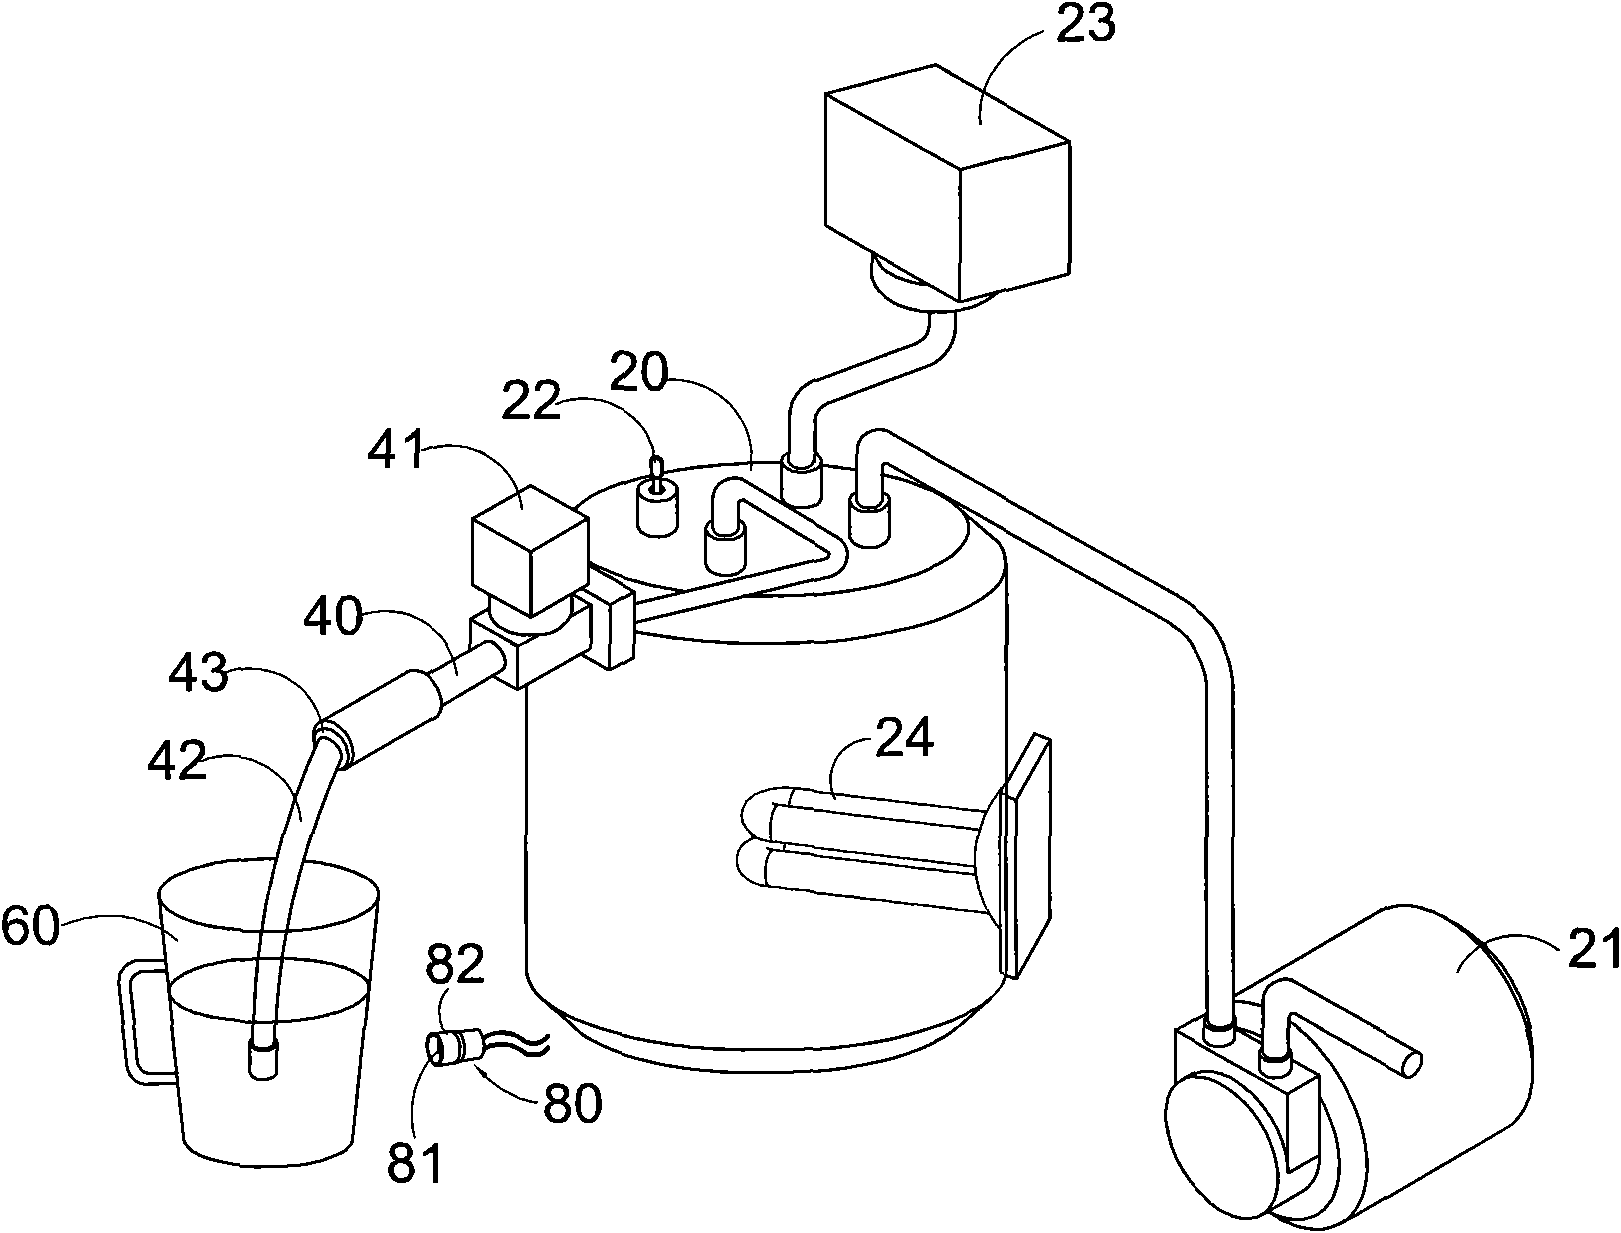 Steam heating device capable of measuring temperature by infrared